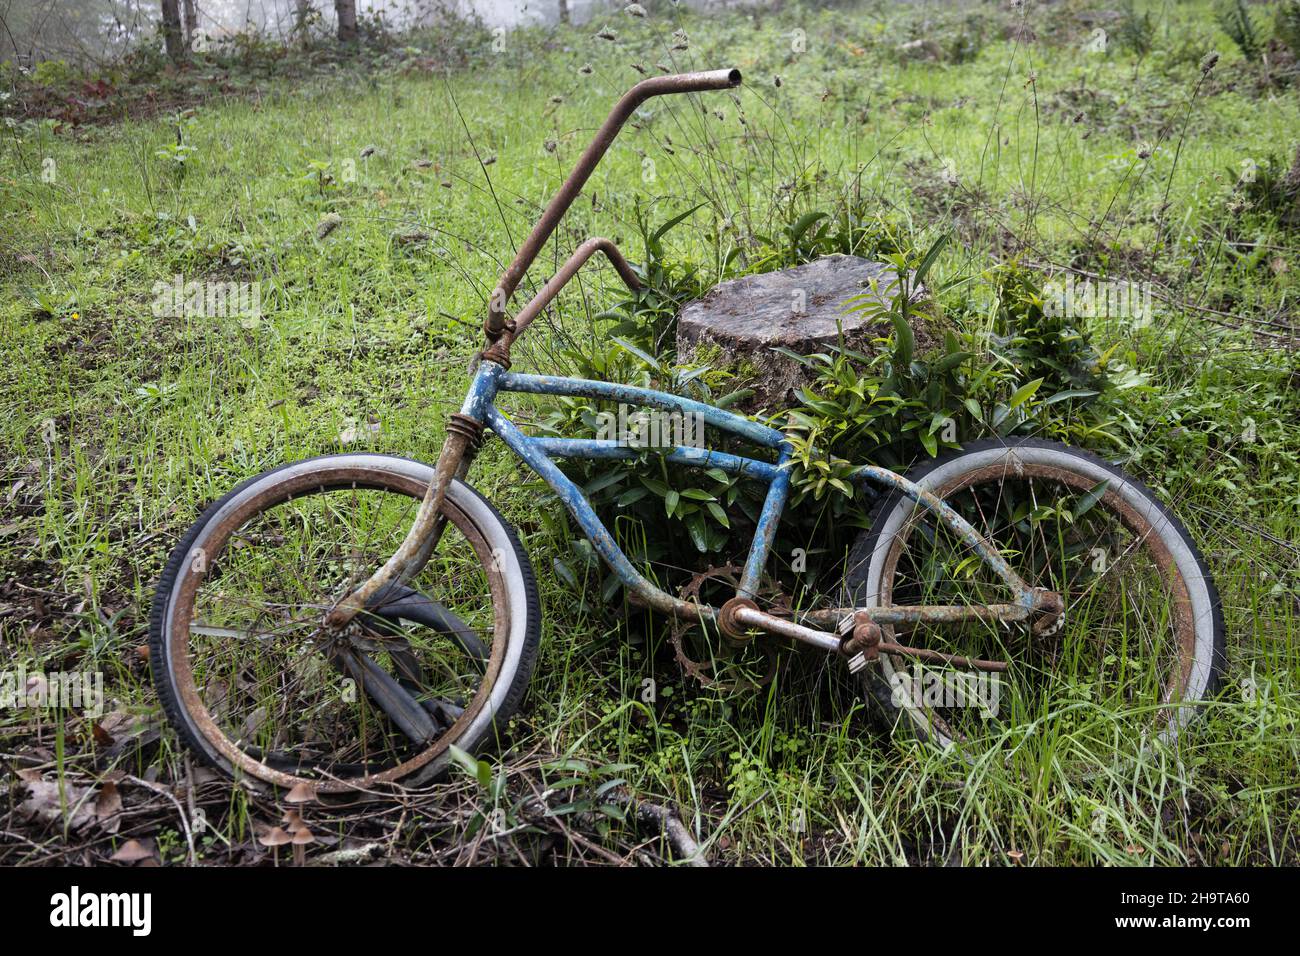 A forgotten old bicycle with no seat leaning against a stump. Stock Photo